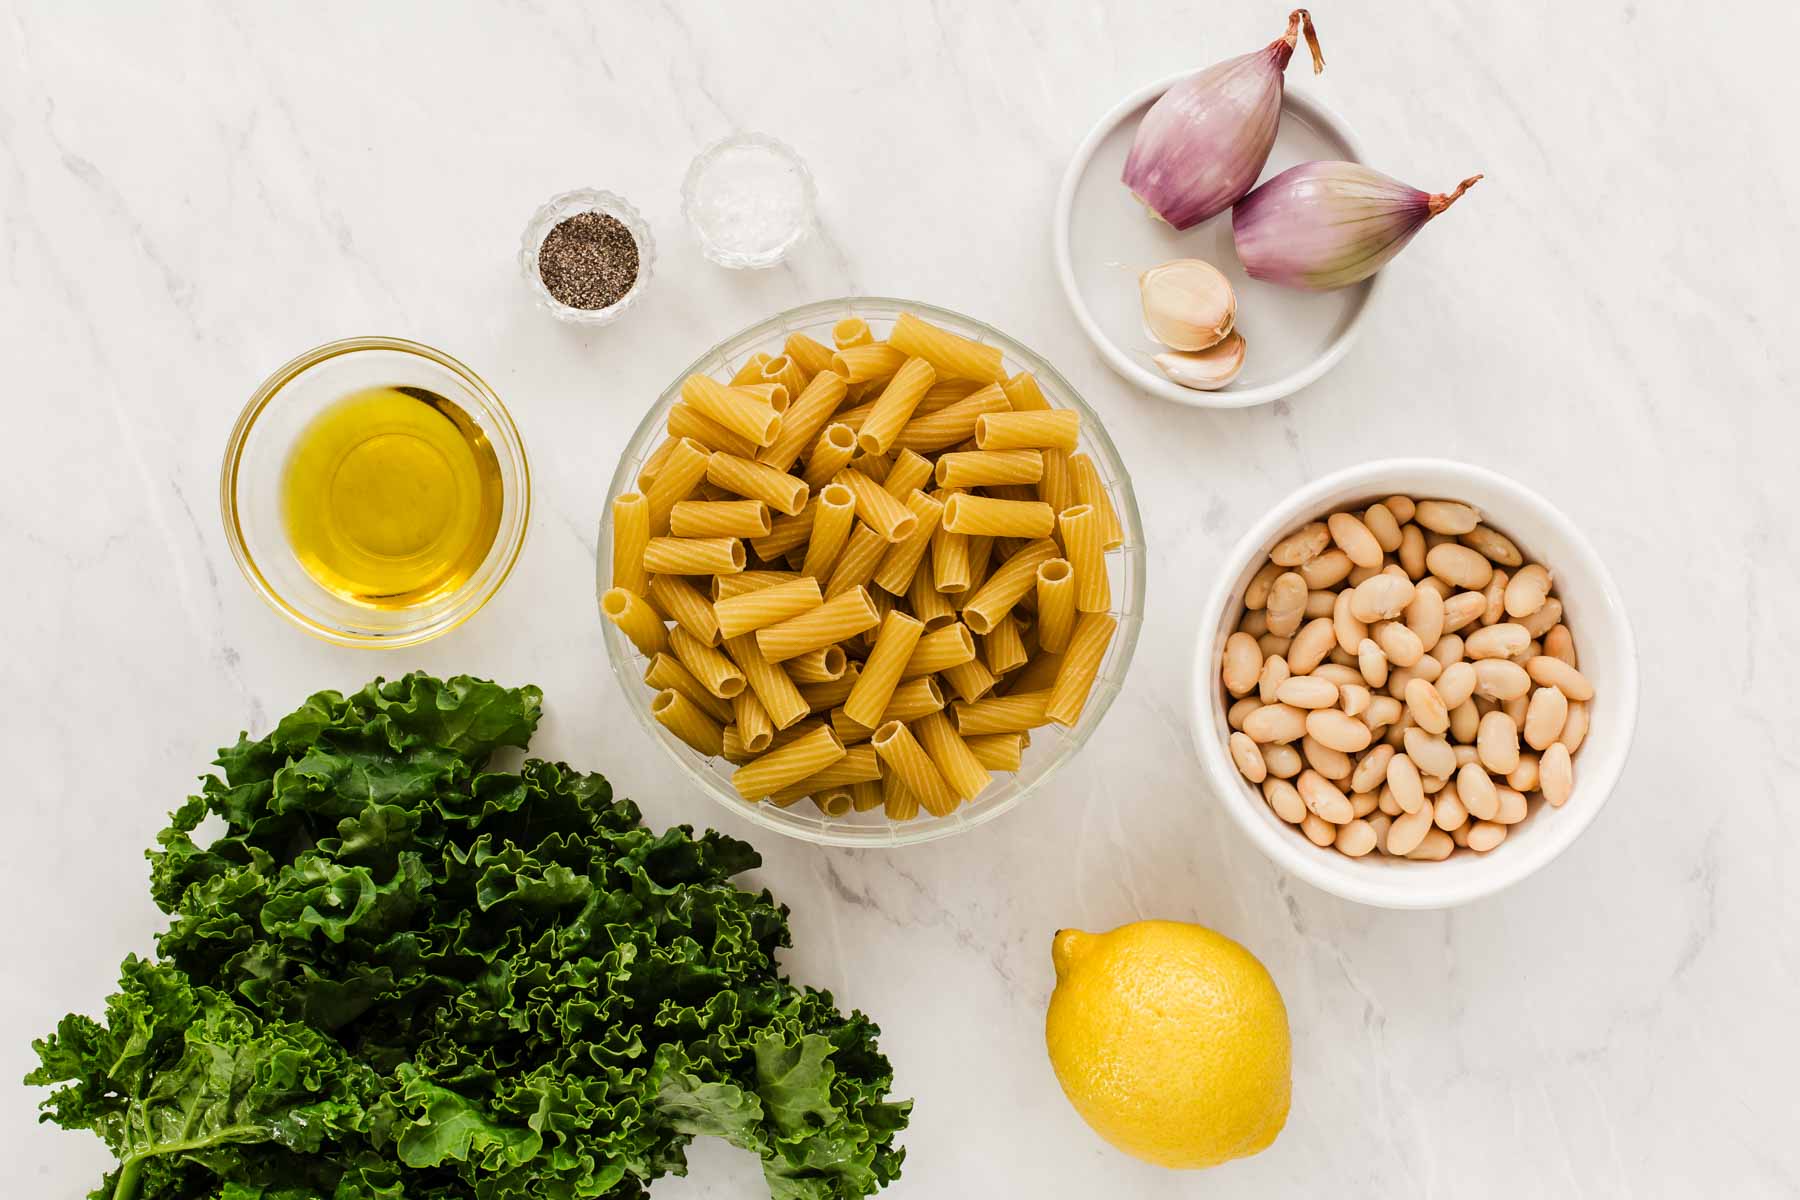 Greens, pasta, beans, and shallots in small bowls on marble counter.